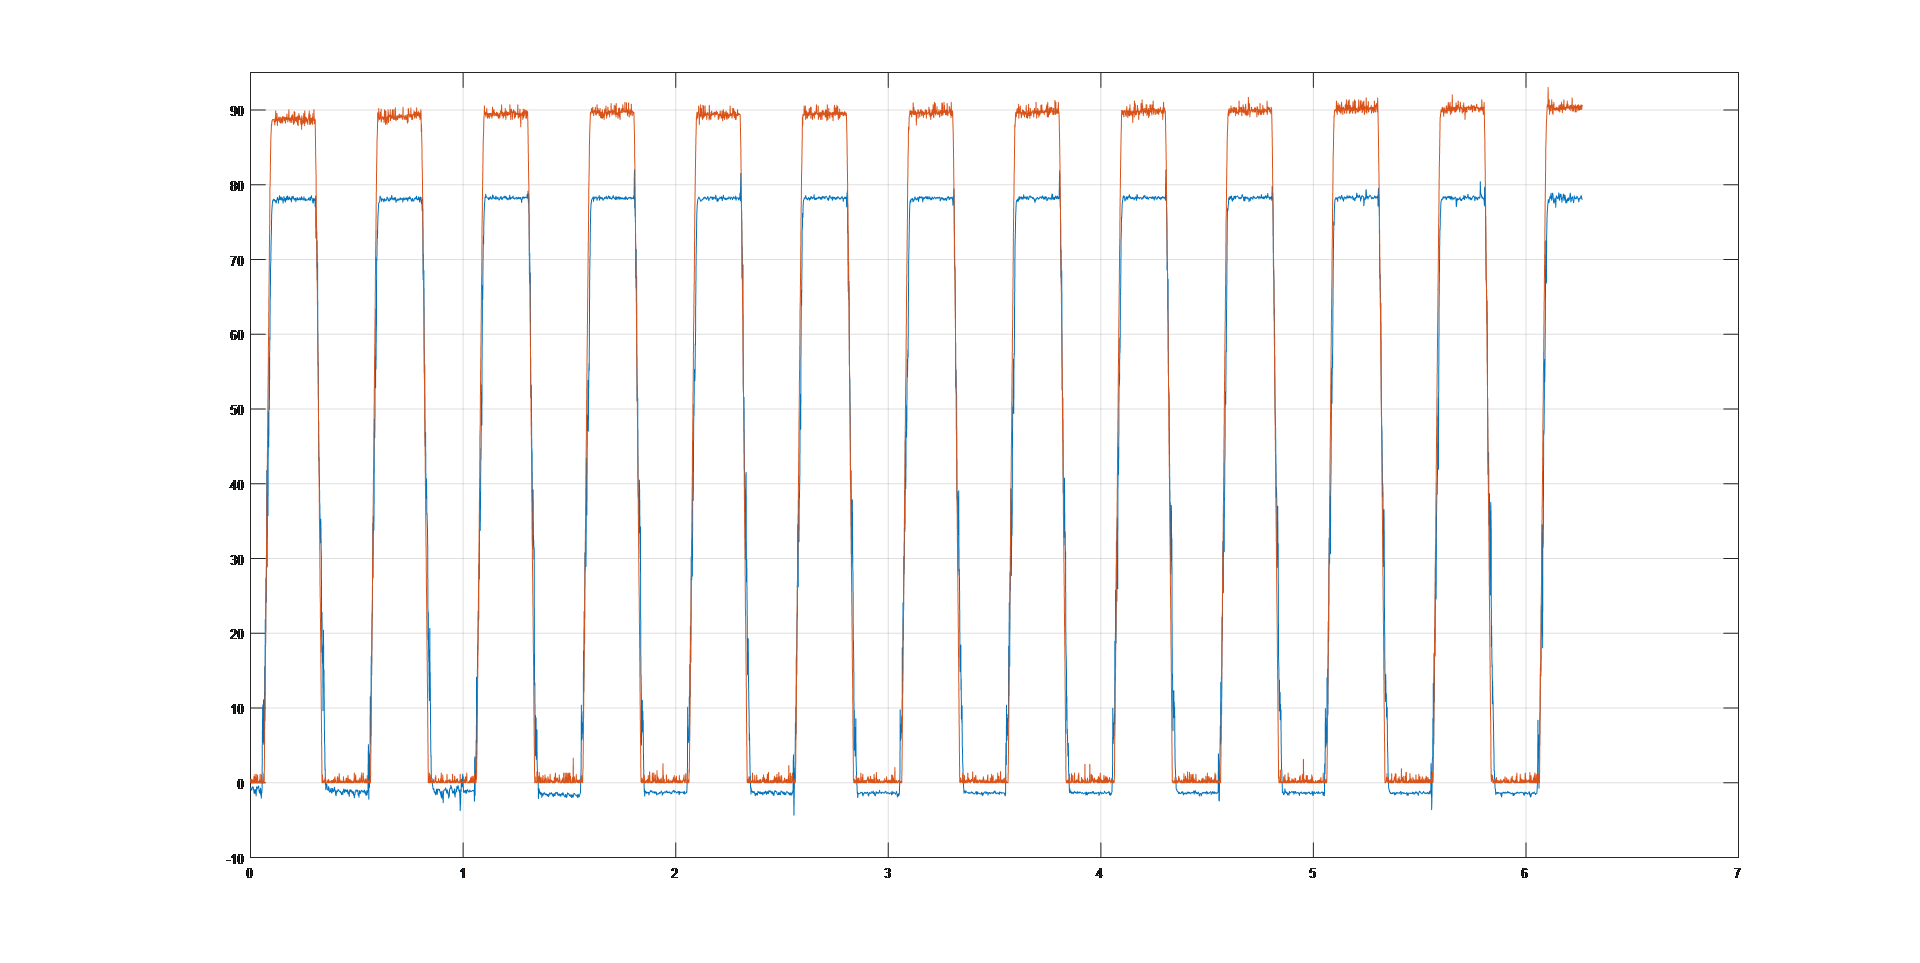 Graphs of signals from the potentiometer (orange color) and the MPU6050 sensor (blue color) along the X axis